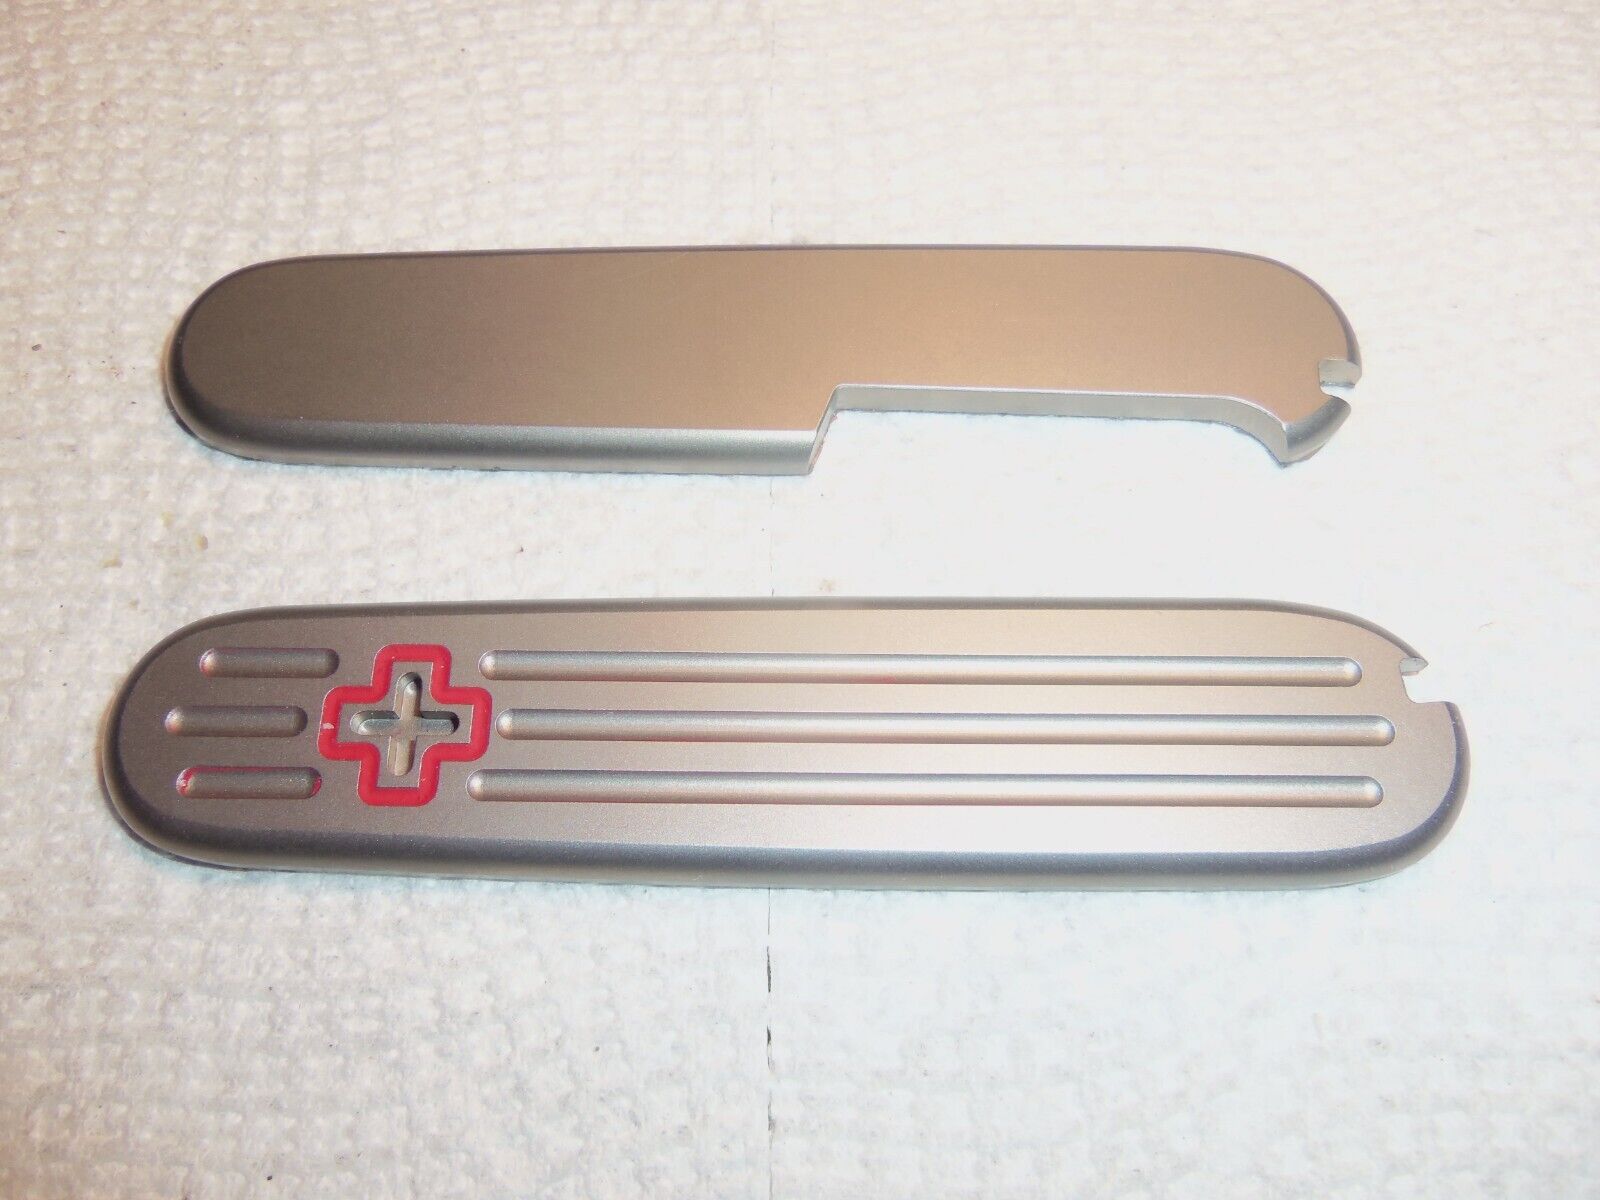 VICTORINOX SWISS ARMY KNIFE 91MM REAL TC4 TITANIUM SCALES * $30 IN FREE EXTRAS